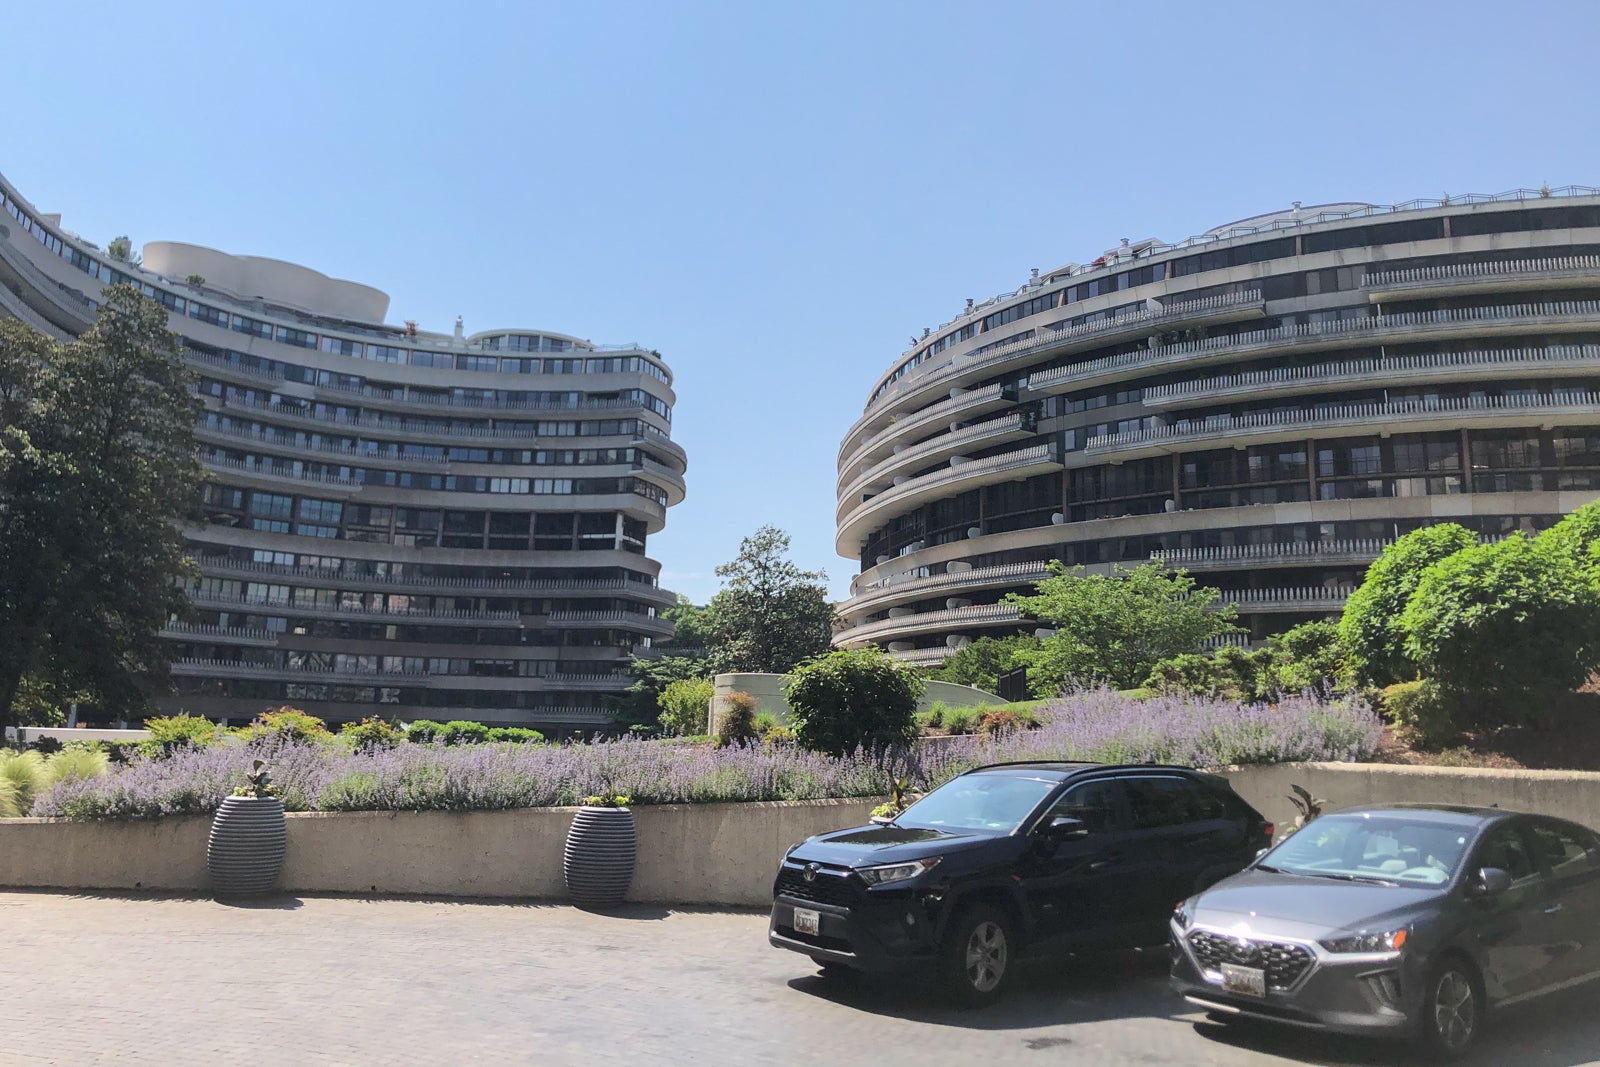 A view of two of the Watergate complex's six buildings.